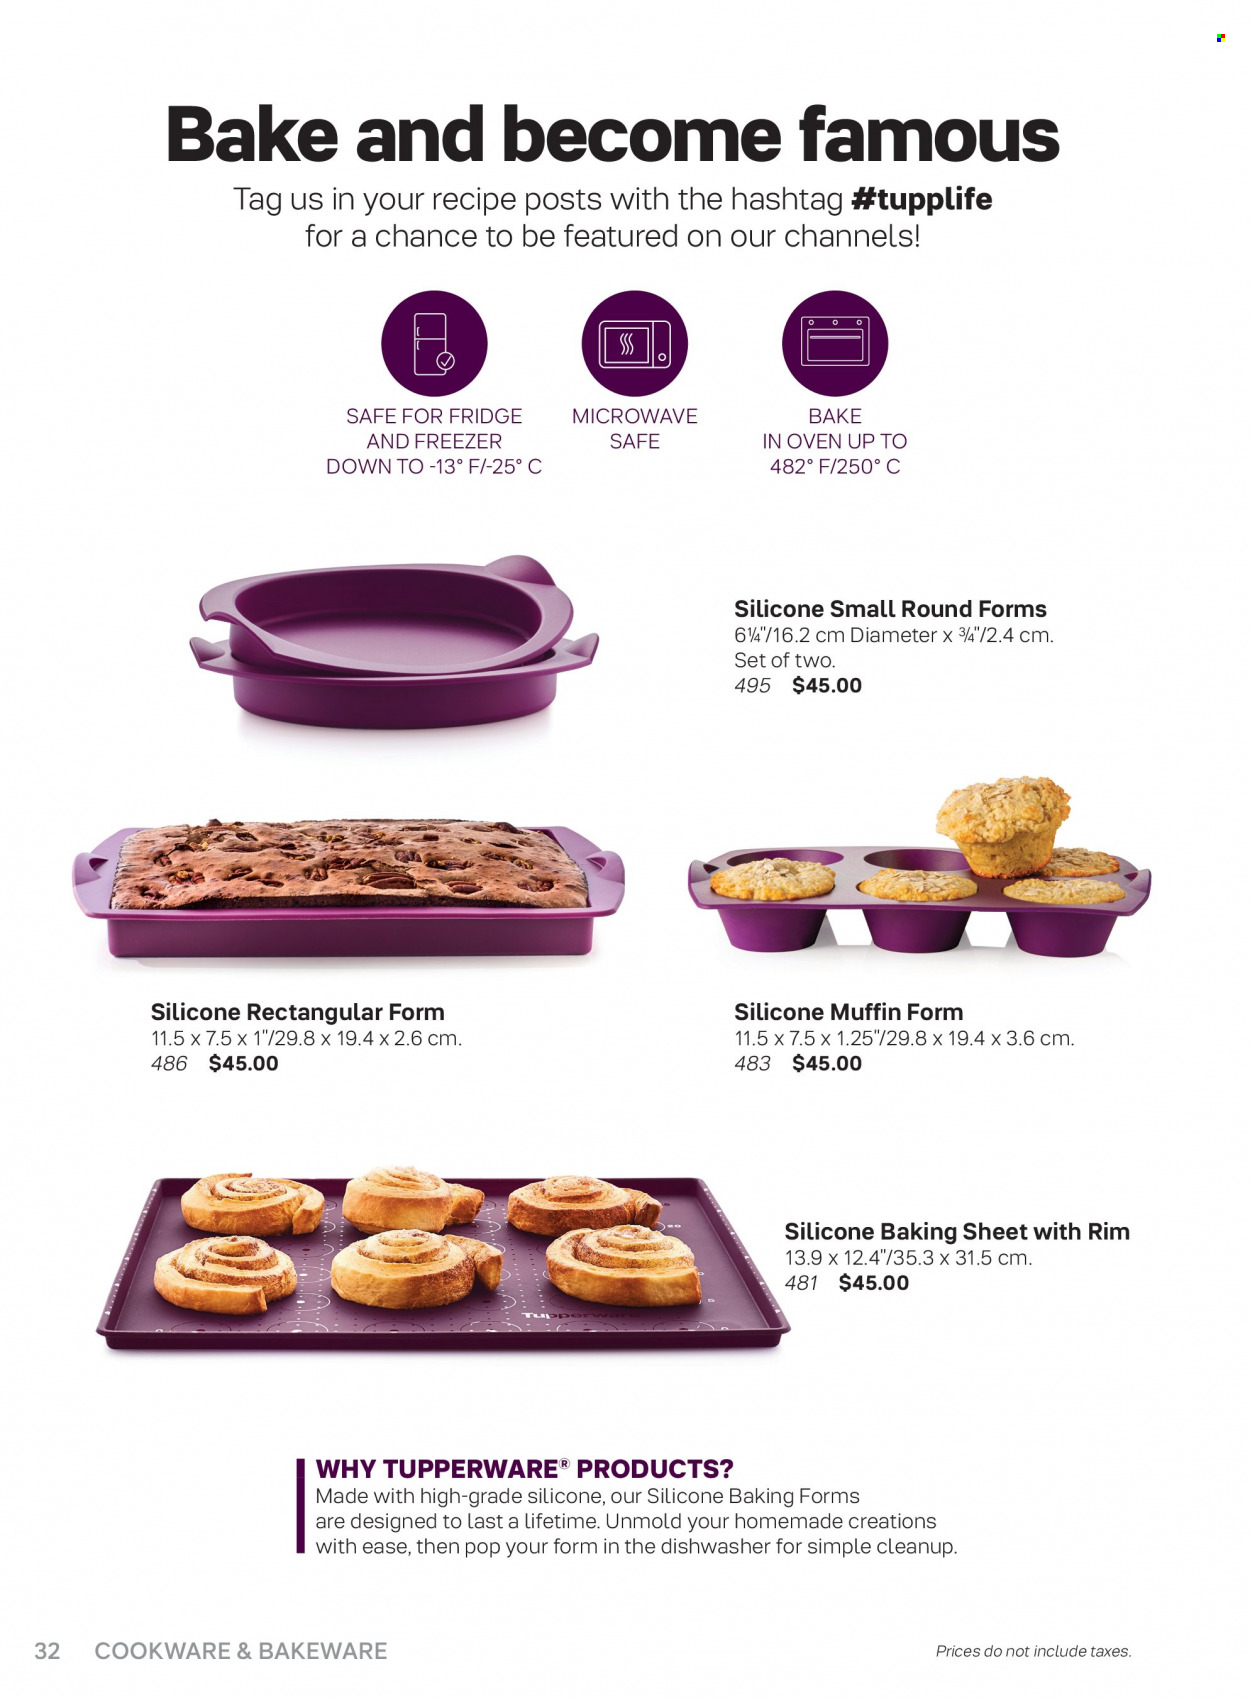 Tupperware flyer . Page 32.